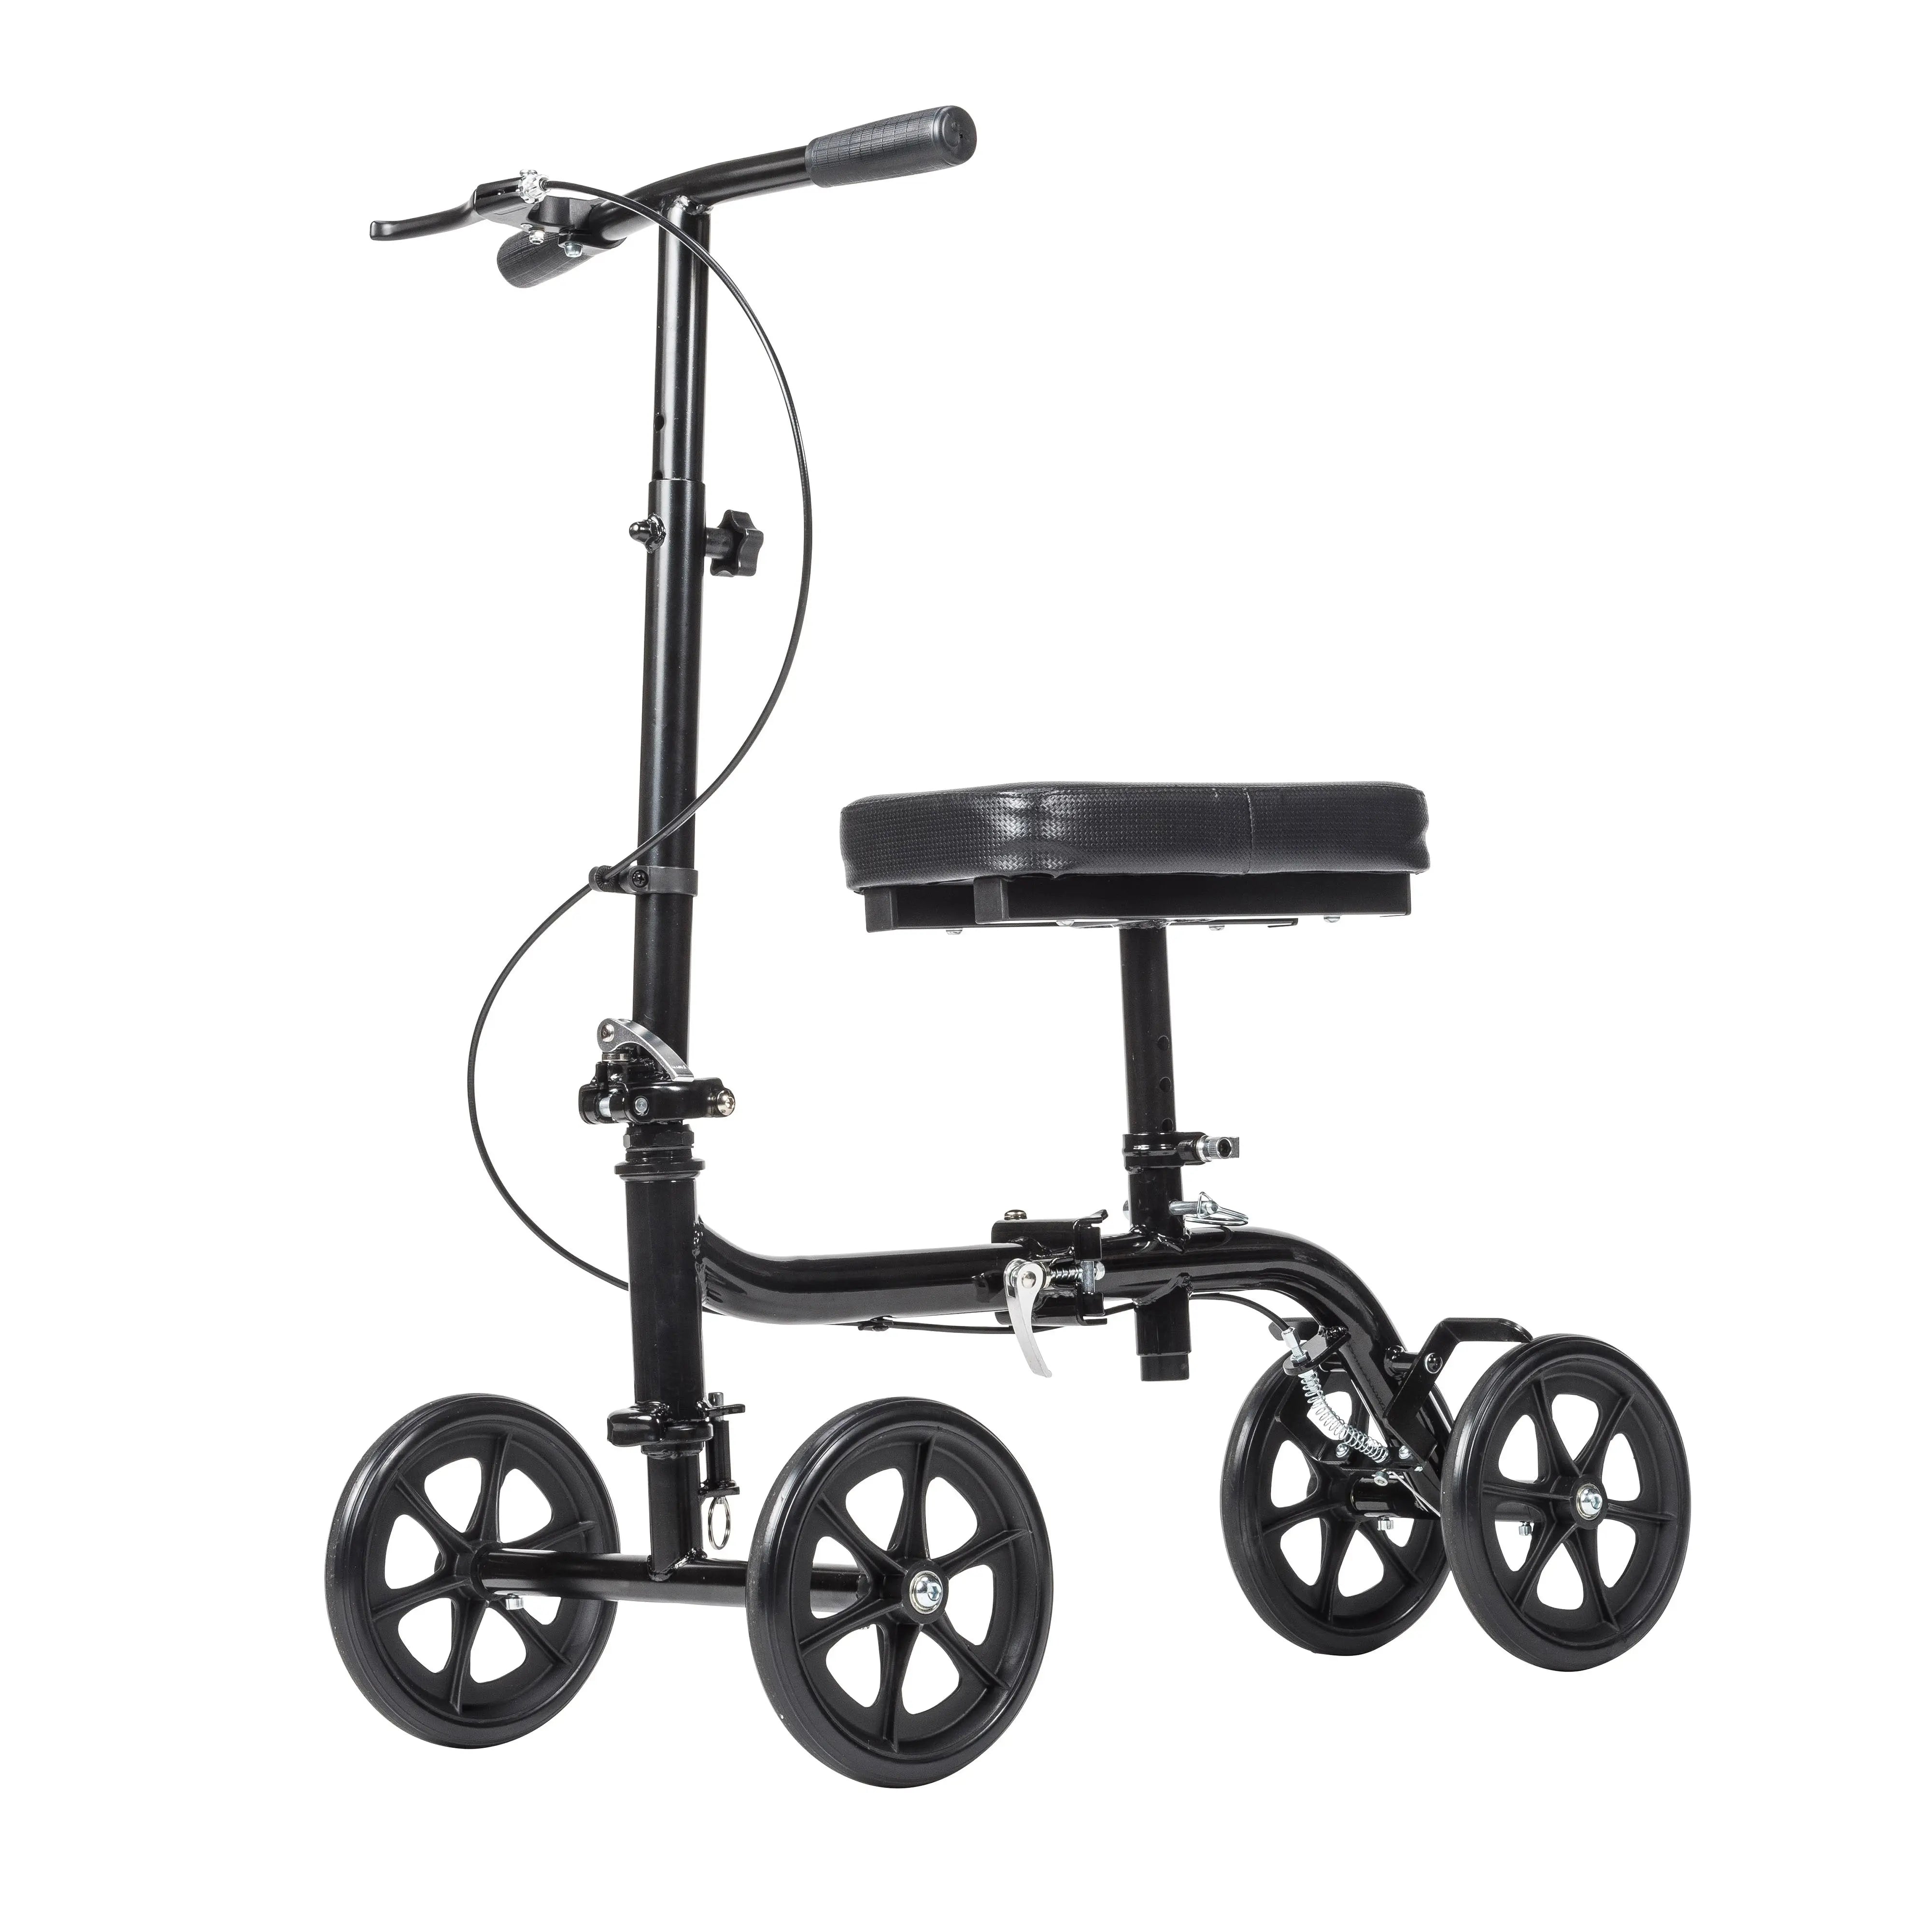 Steerable Folding Knee Walker Knee Scooter, Alternative to Crutches - Home Health Store Inc